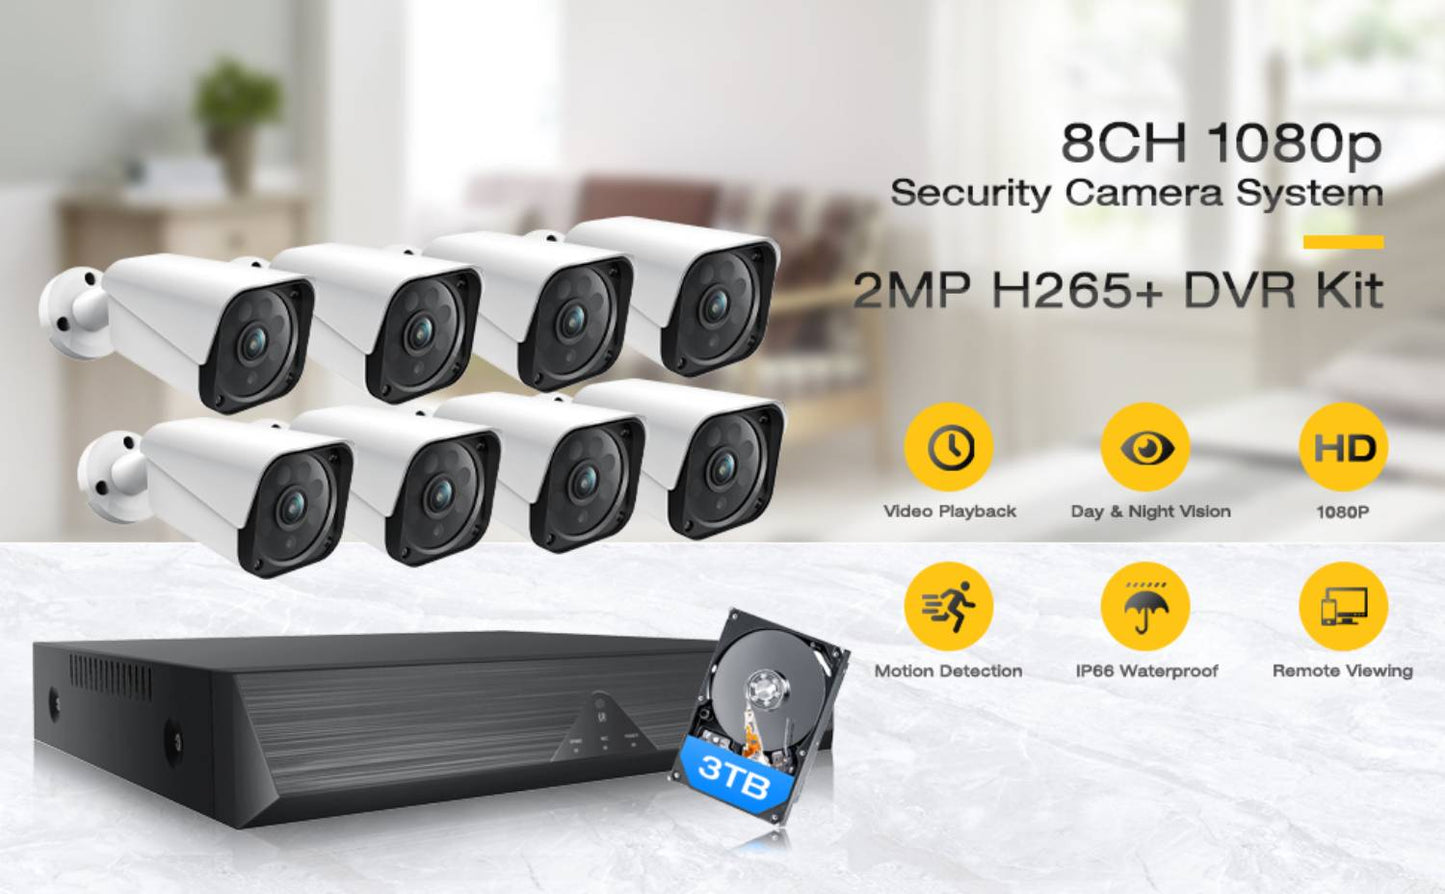 TOGUARD Home Security Camera 1080P 8CH DVR Outdoor Waterproof Wired CCTV Surveillance Camera IR Night Vision Remote